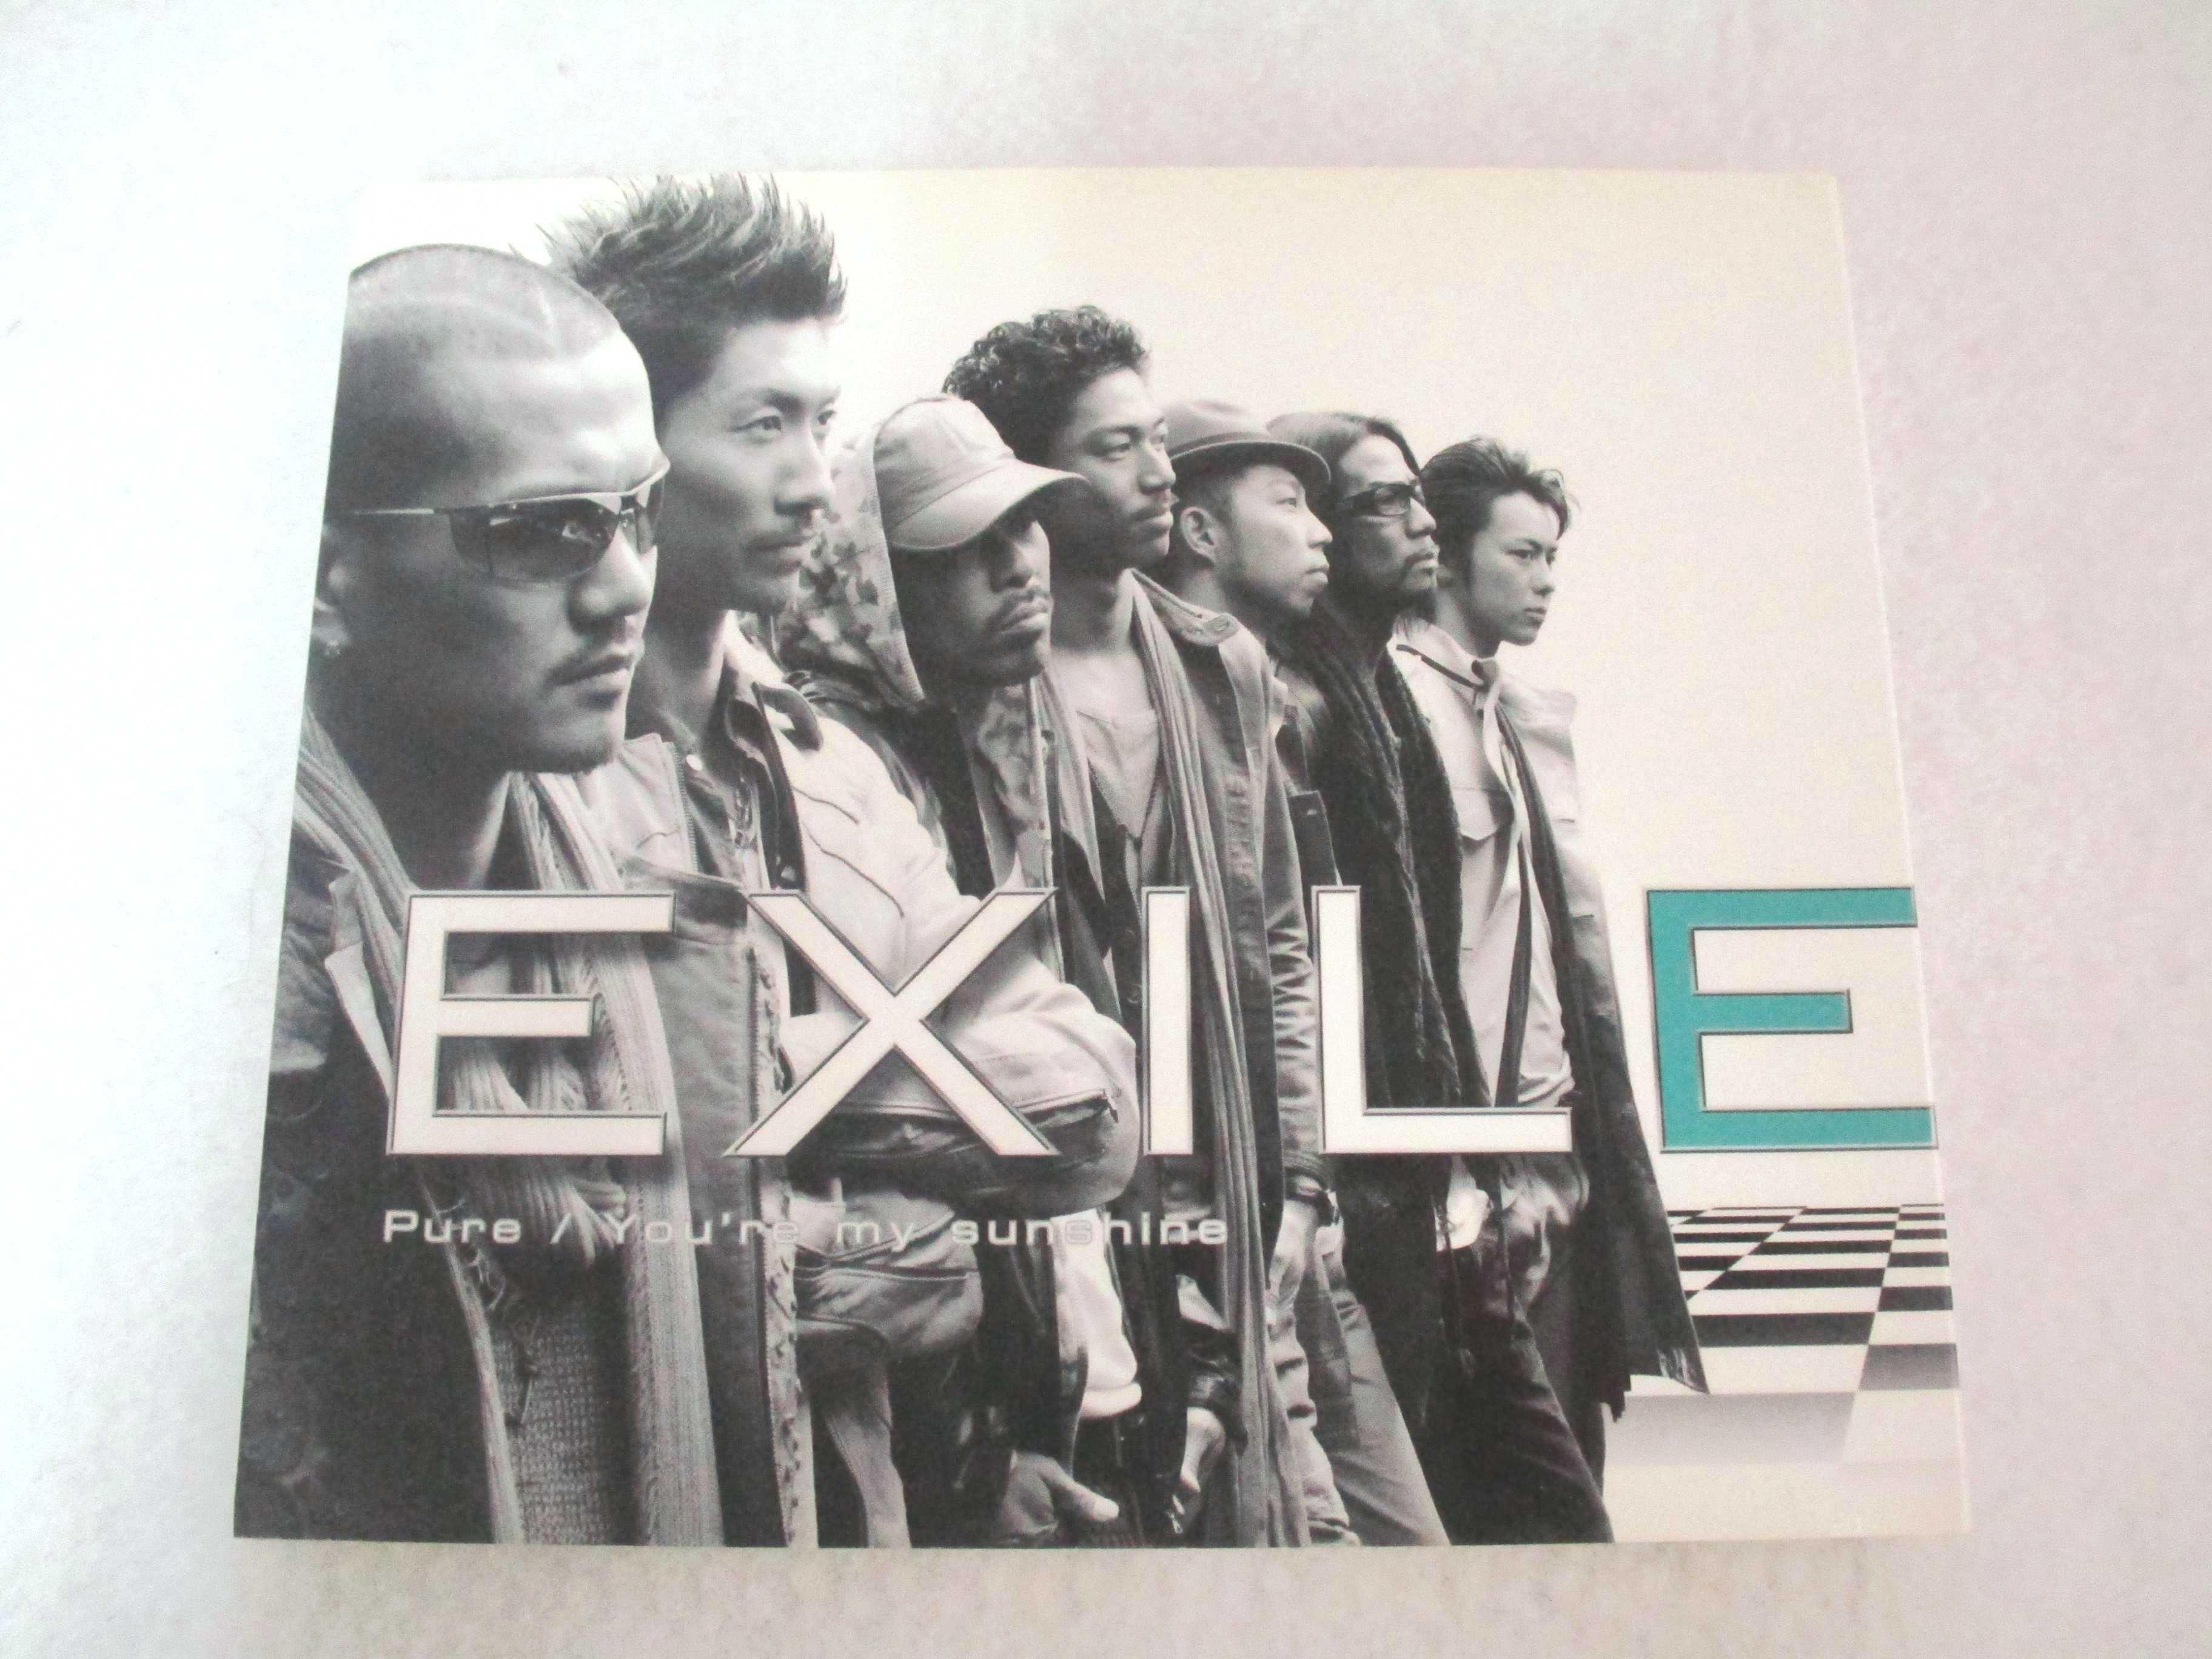 AC07228 【中古】 【CD】 Pure/You're my sunshine/EXILE